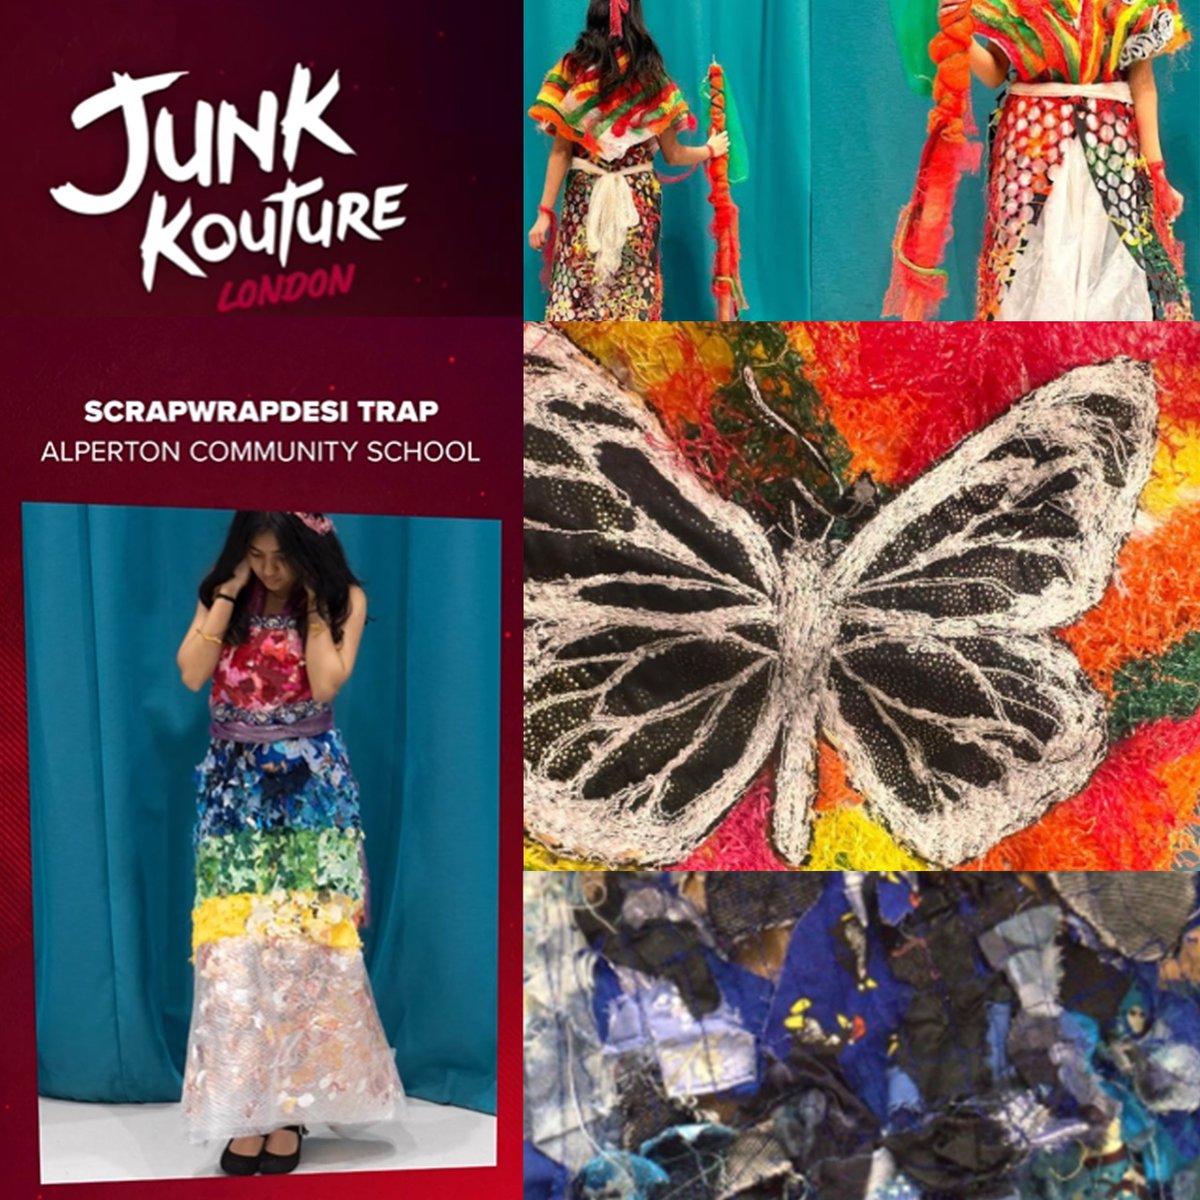 Congratulations to our Textiles students who have been shortlisted for the London Finals of the @junkkouture competition! This is a tremendous achievement and we are really proud of all their hard work. Below you can see a link with their final designs: bit.ly/3U2l8Xz